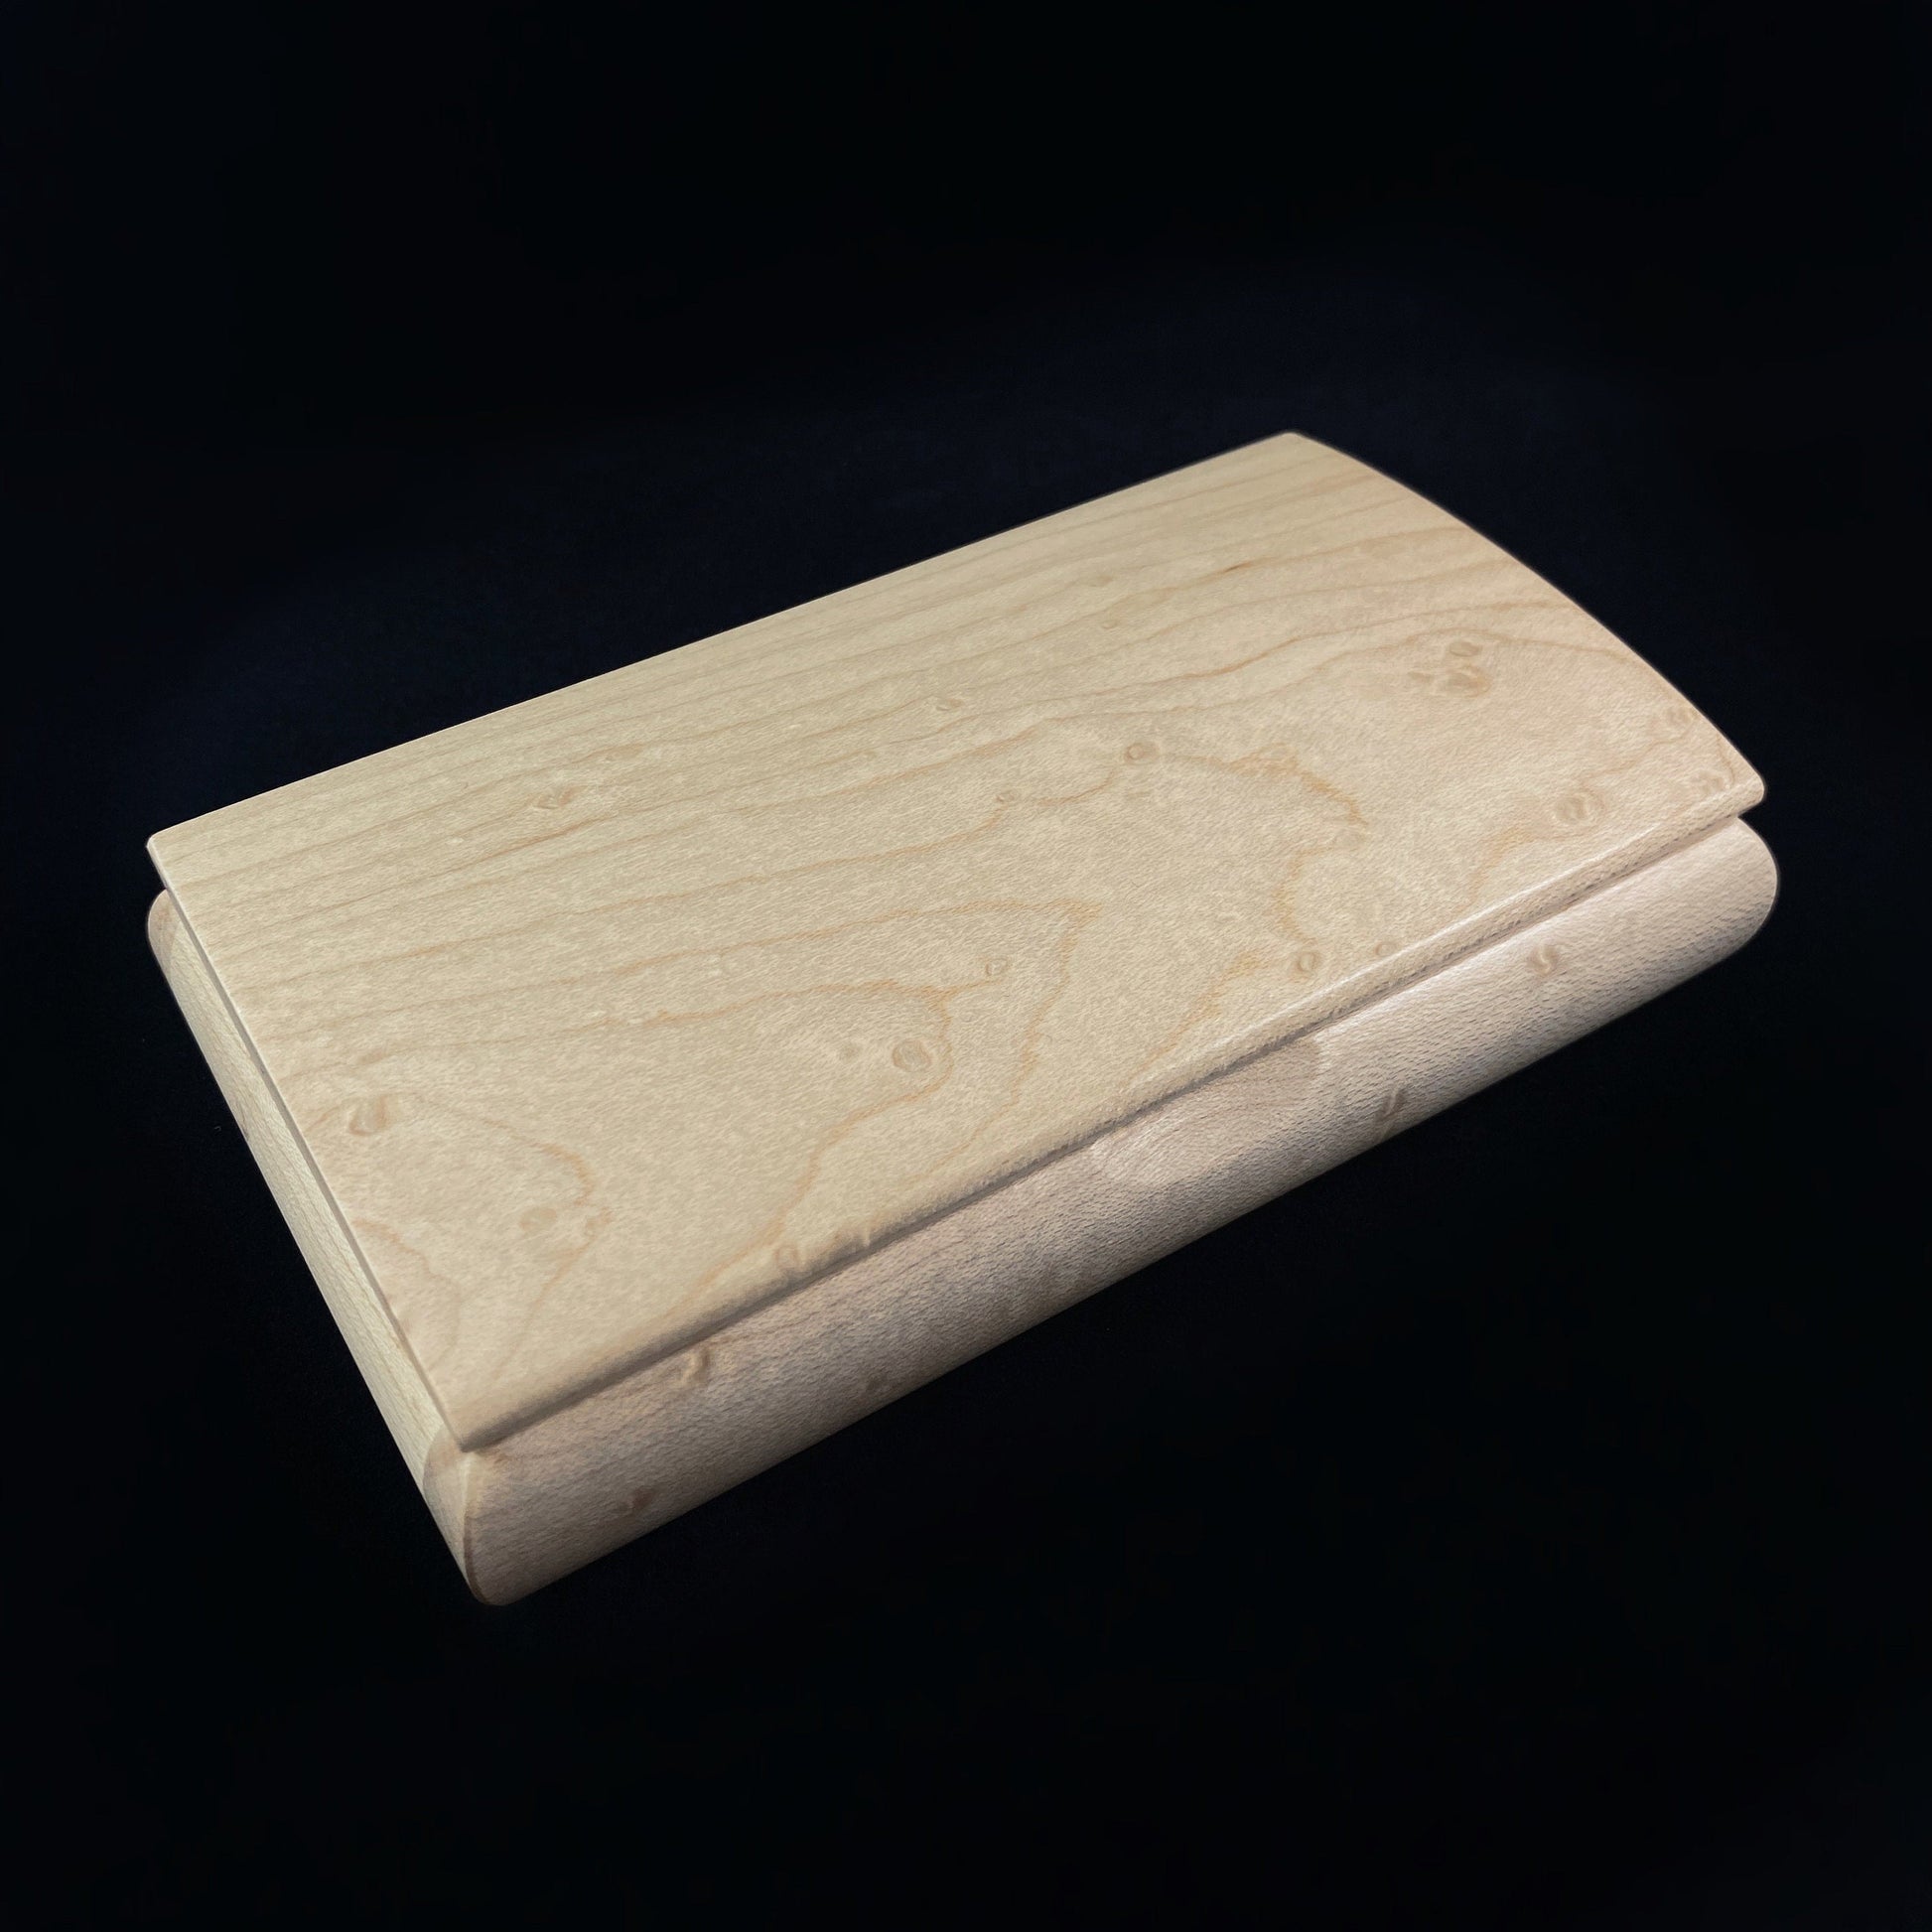 Handmade Wooden Box with Birdseye Maple, Made in USA